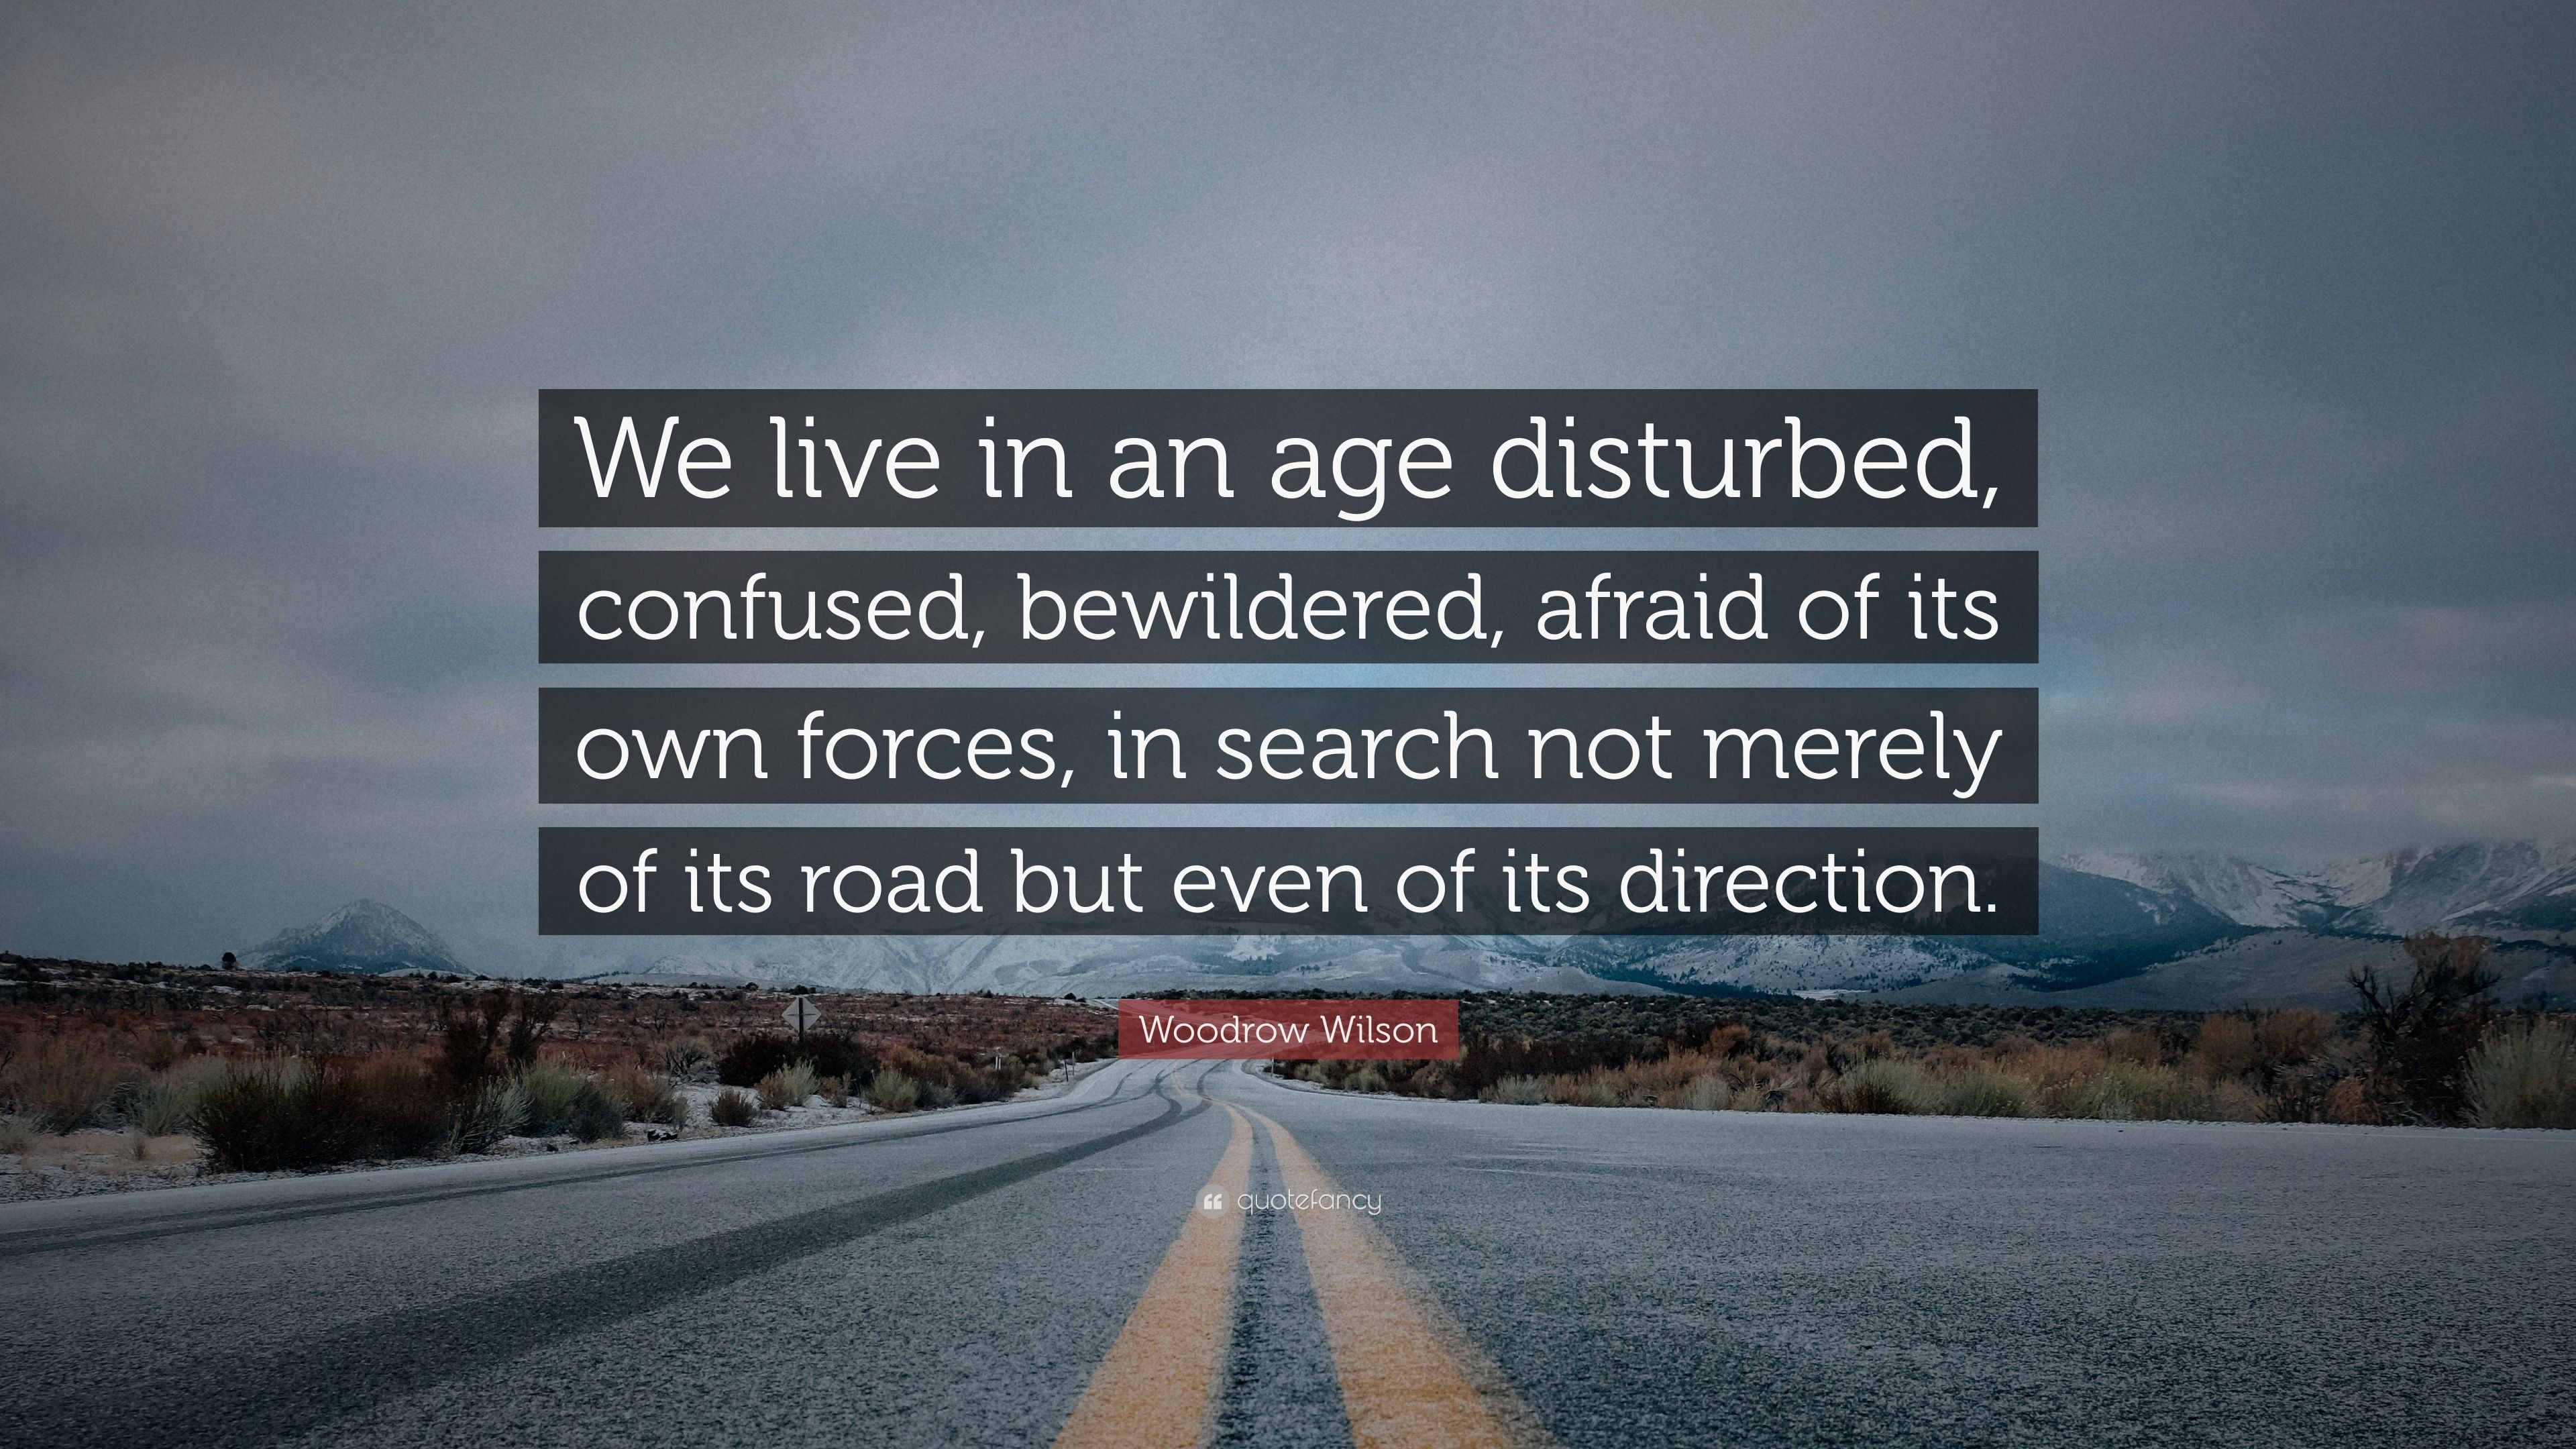 Woodrow Wilson Quote: “We live in an age disturbed, confused